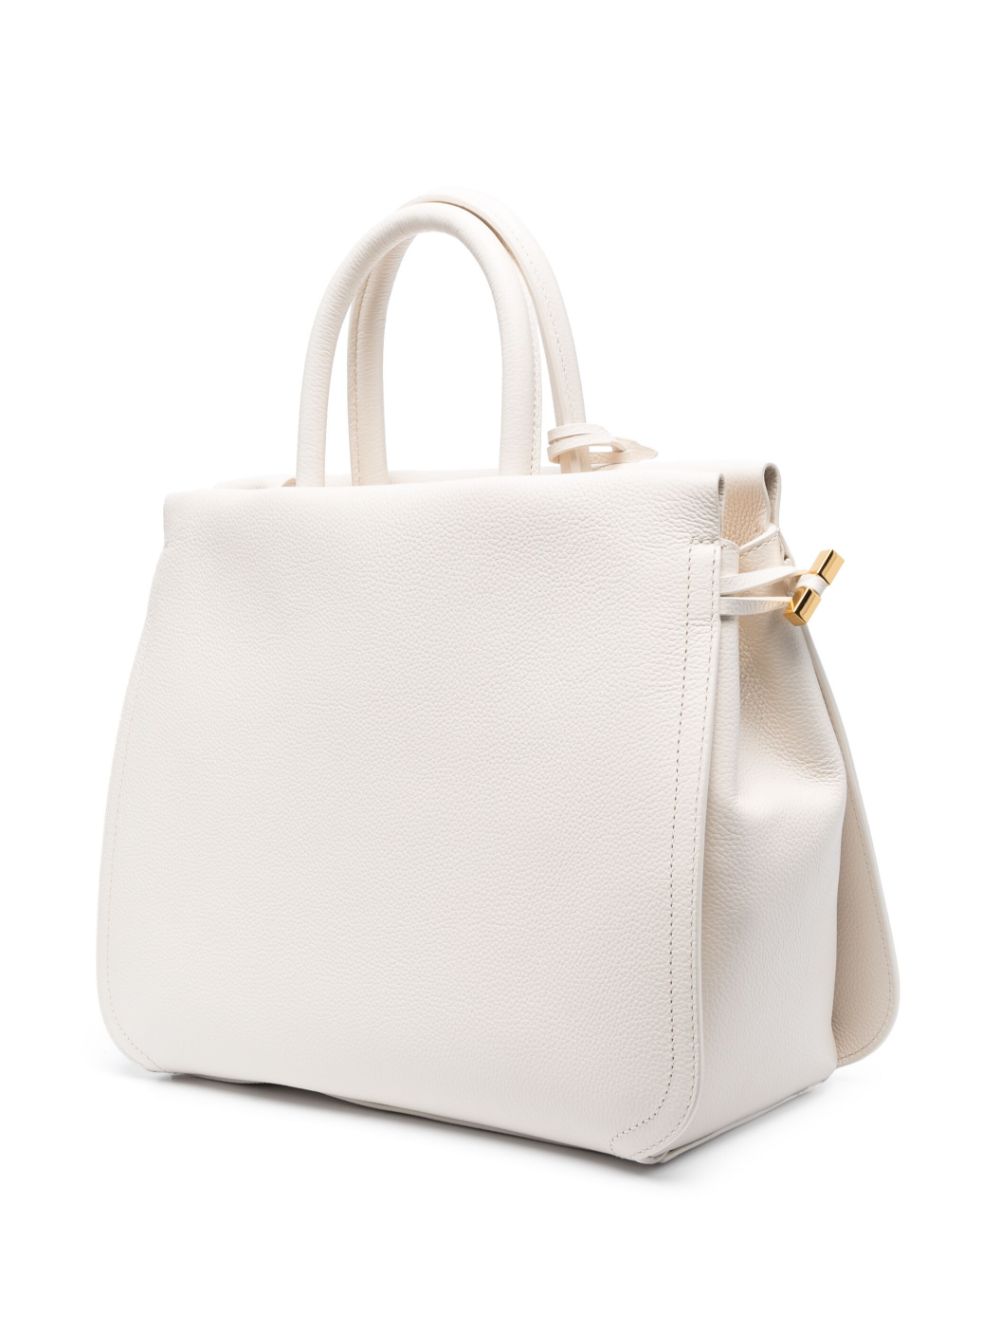 Coccinelle Small Gleen Leather Tote Bag - Farfetch